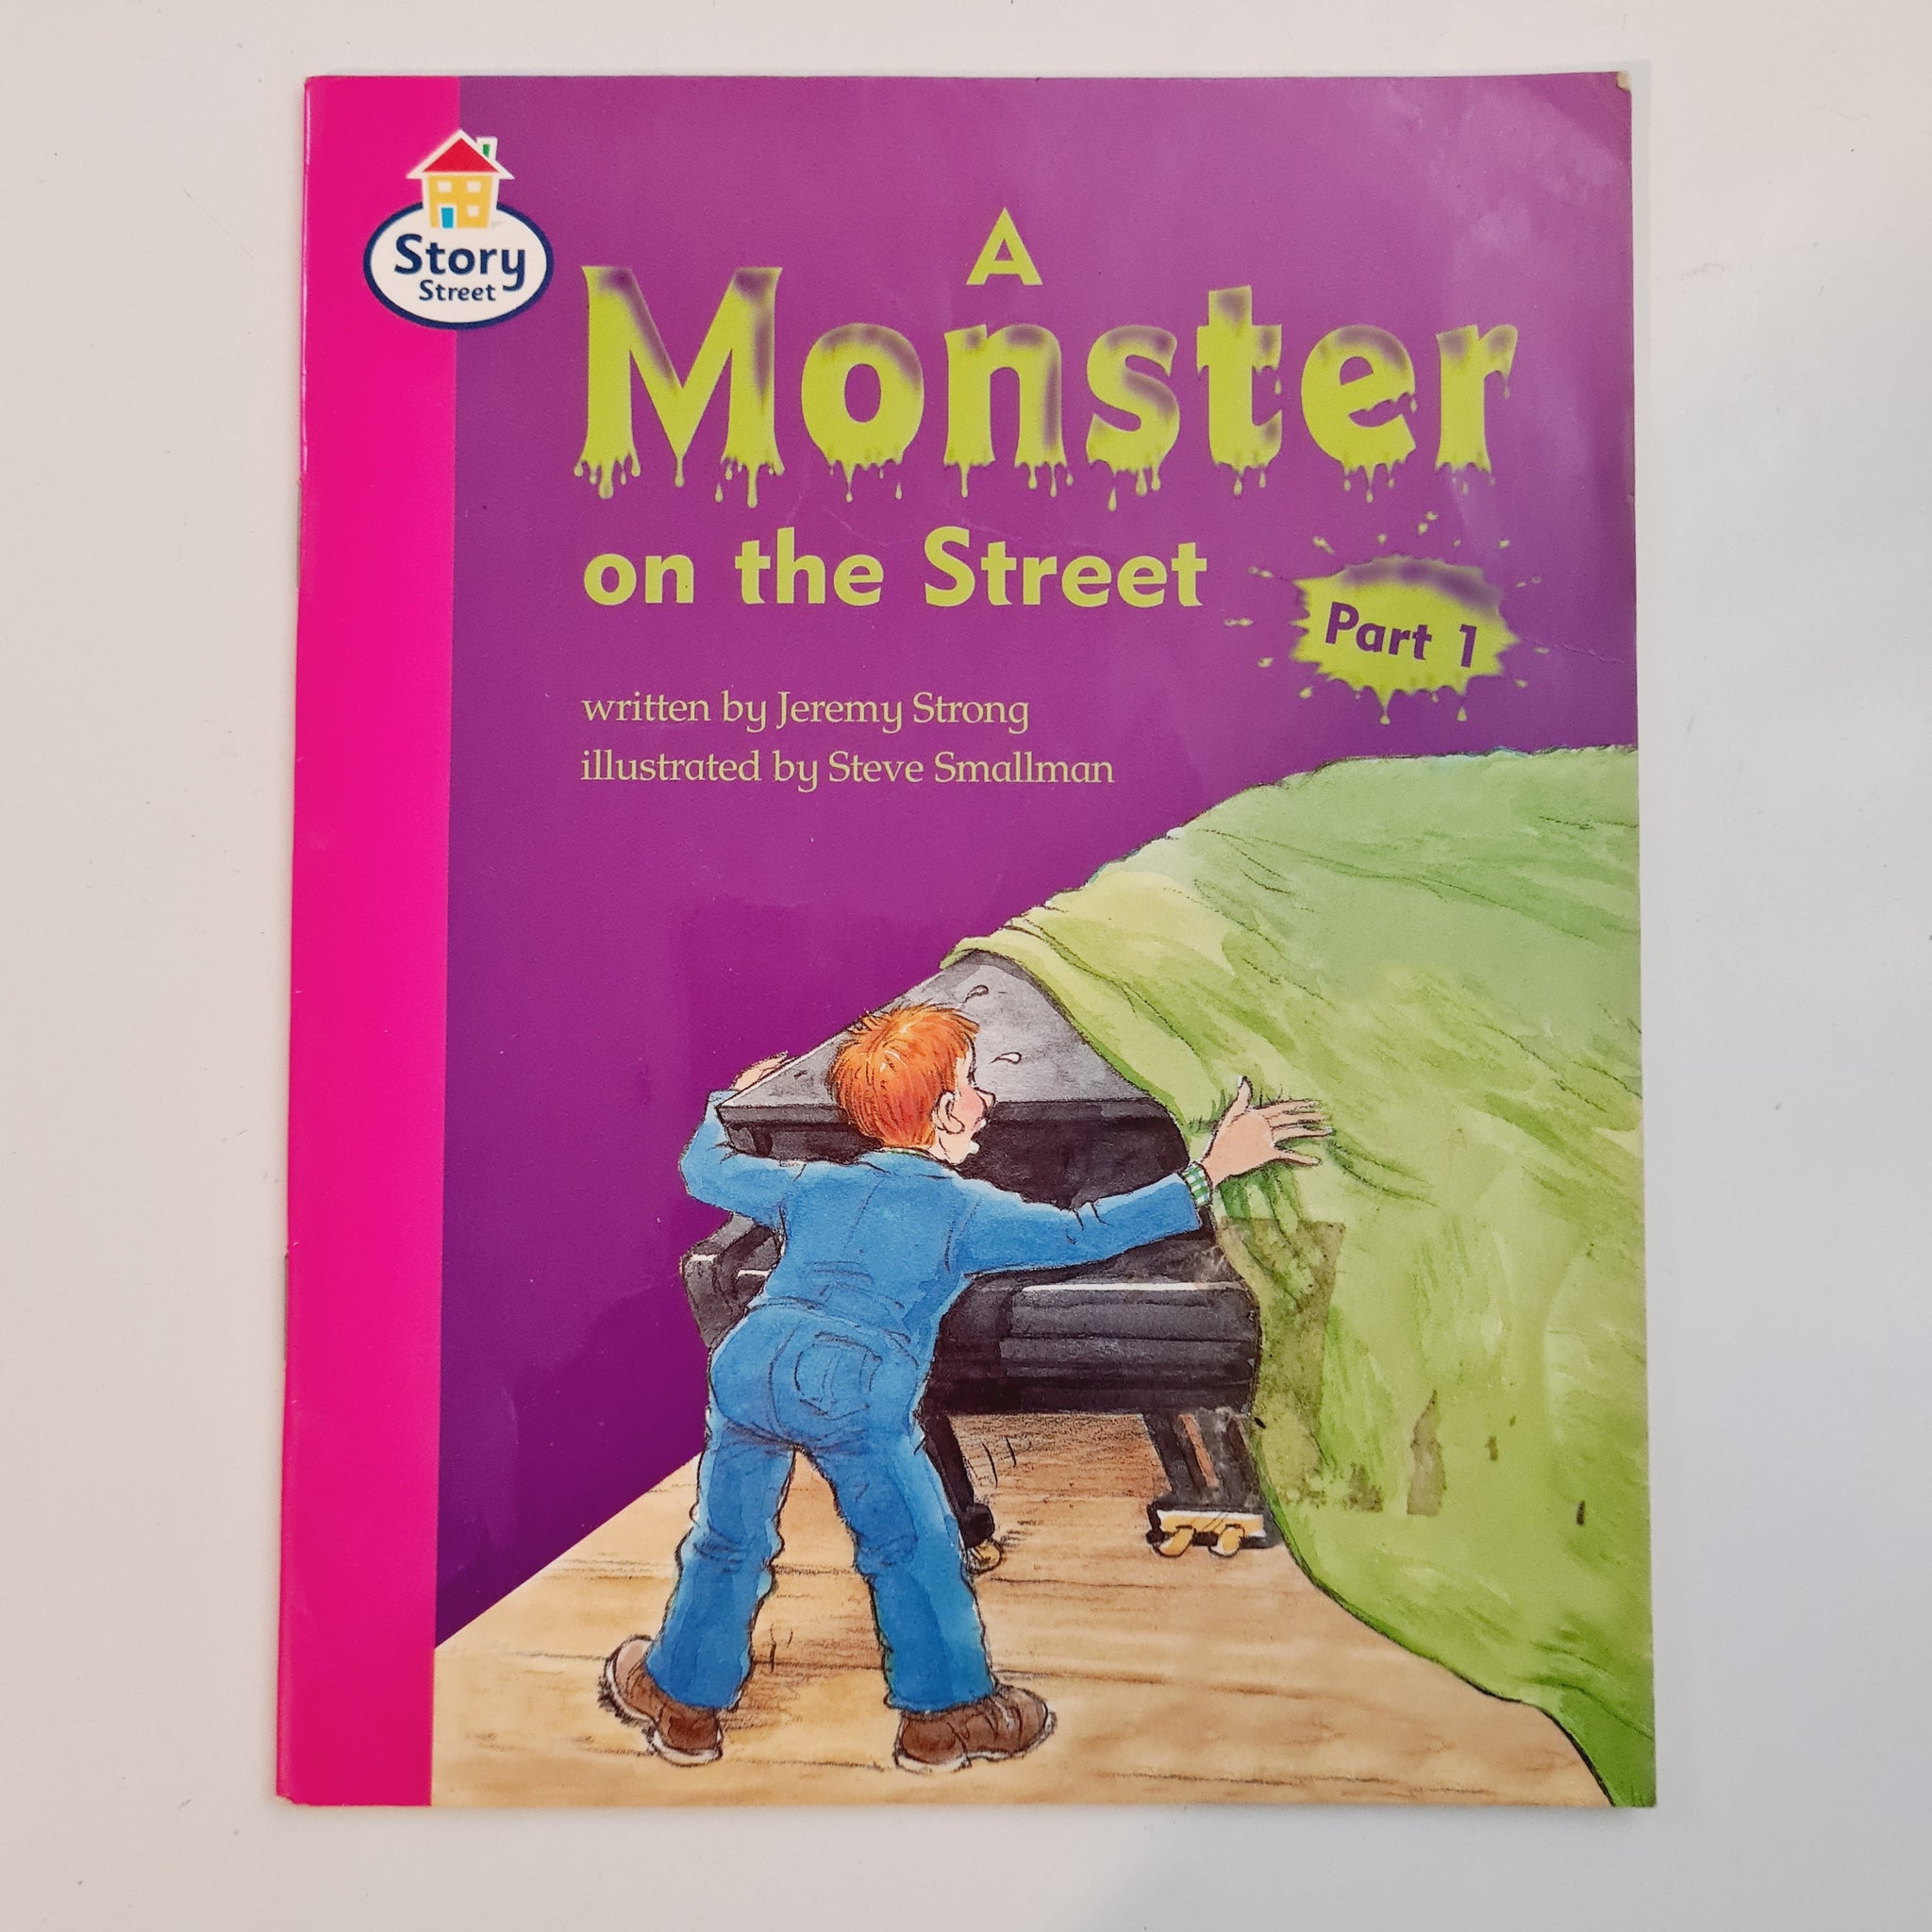 A Monster on the Street